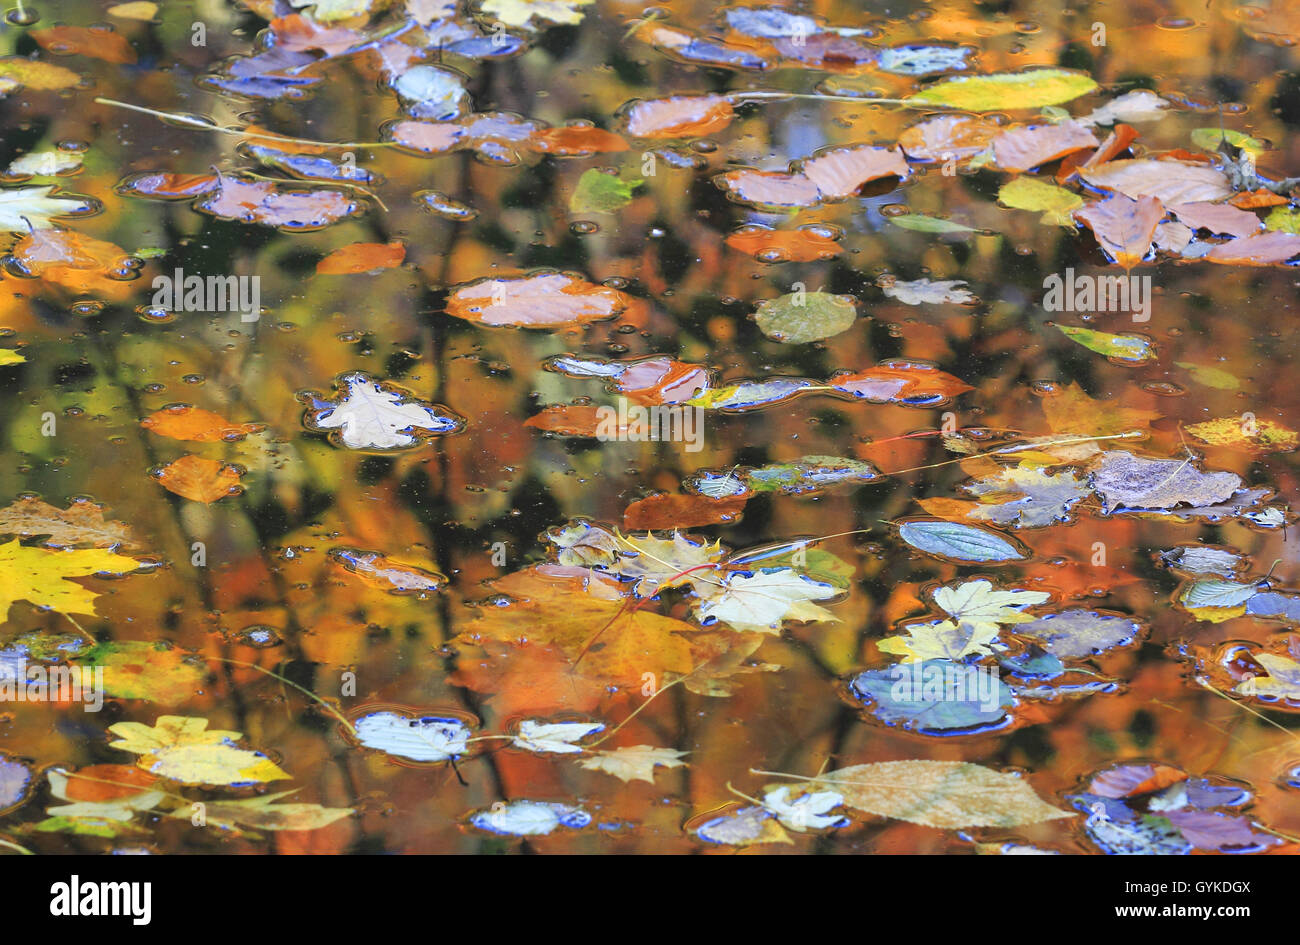 different kind of leaves on watersurface, Germany Stock Photo